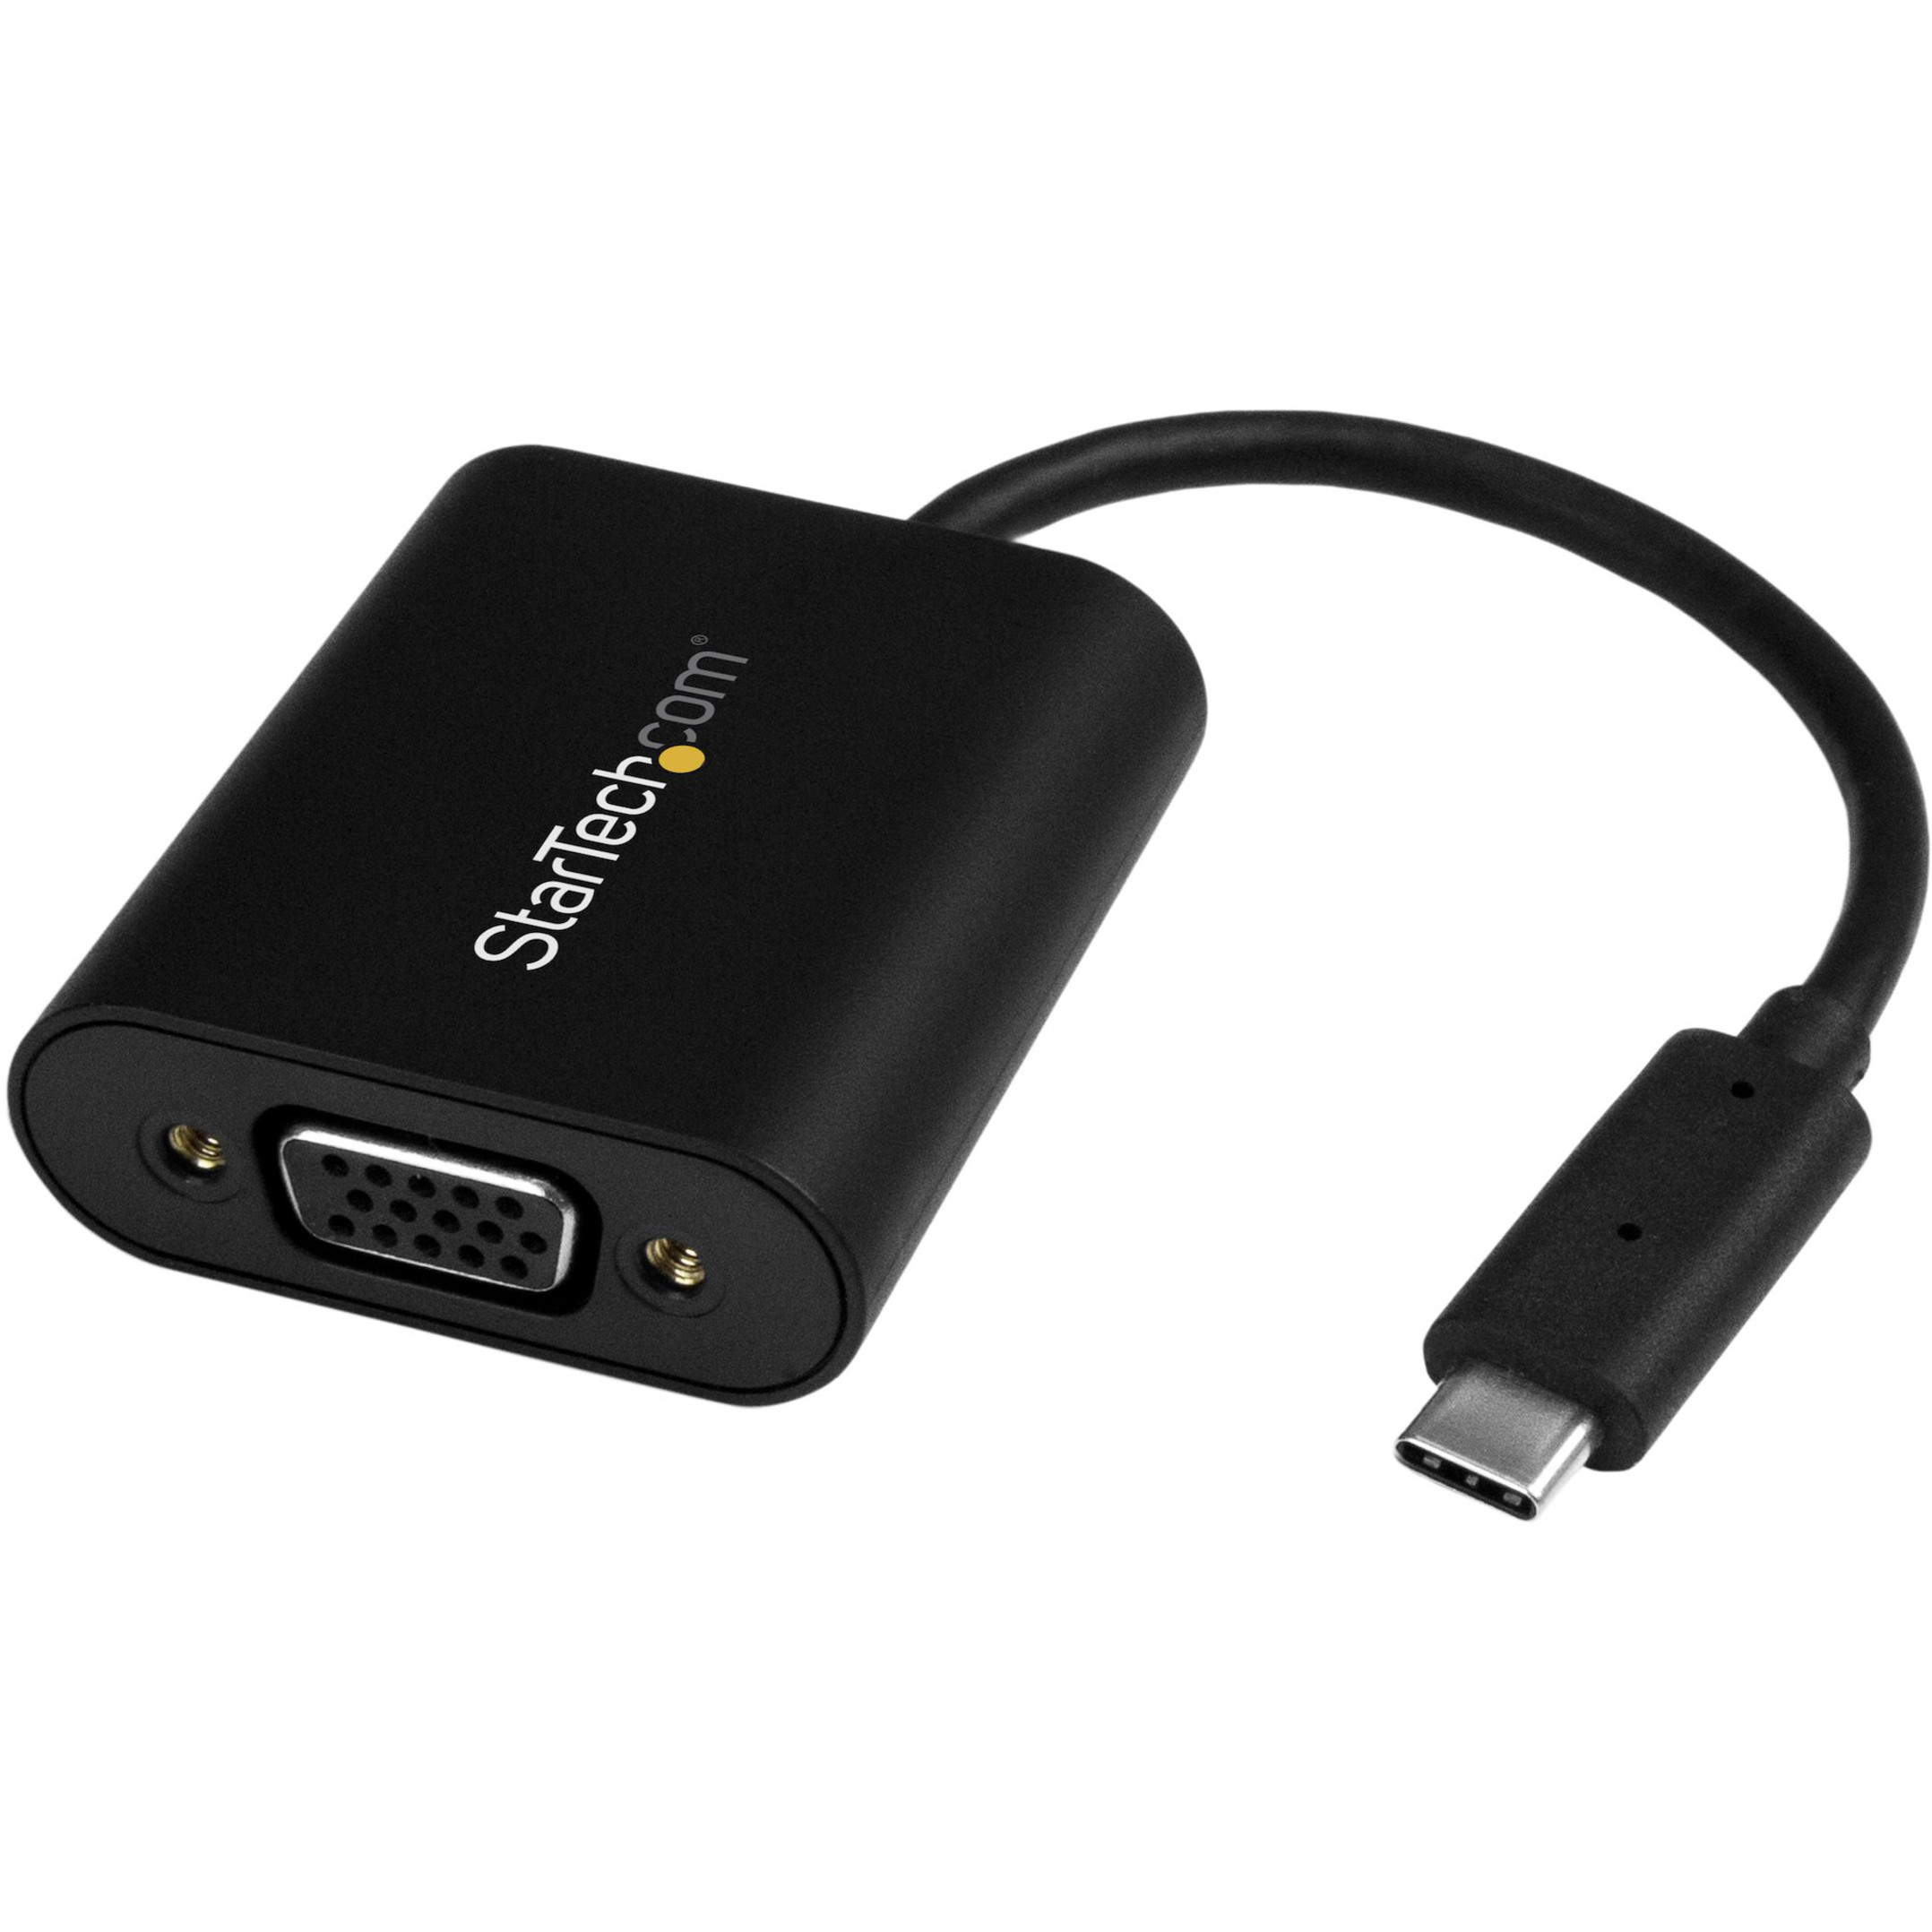 Startech .com USB-C to VGA Adapter1920x1200USB C AdapterUSB Type C to VGA Monitor / Projector AdapterUse this unique adapter to pre… CDP2VGASA